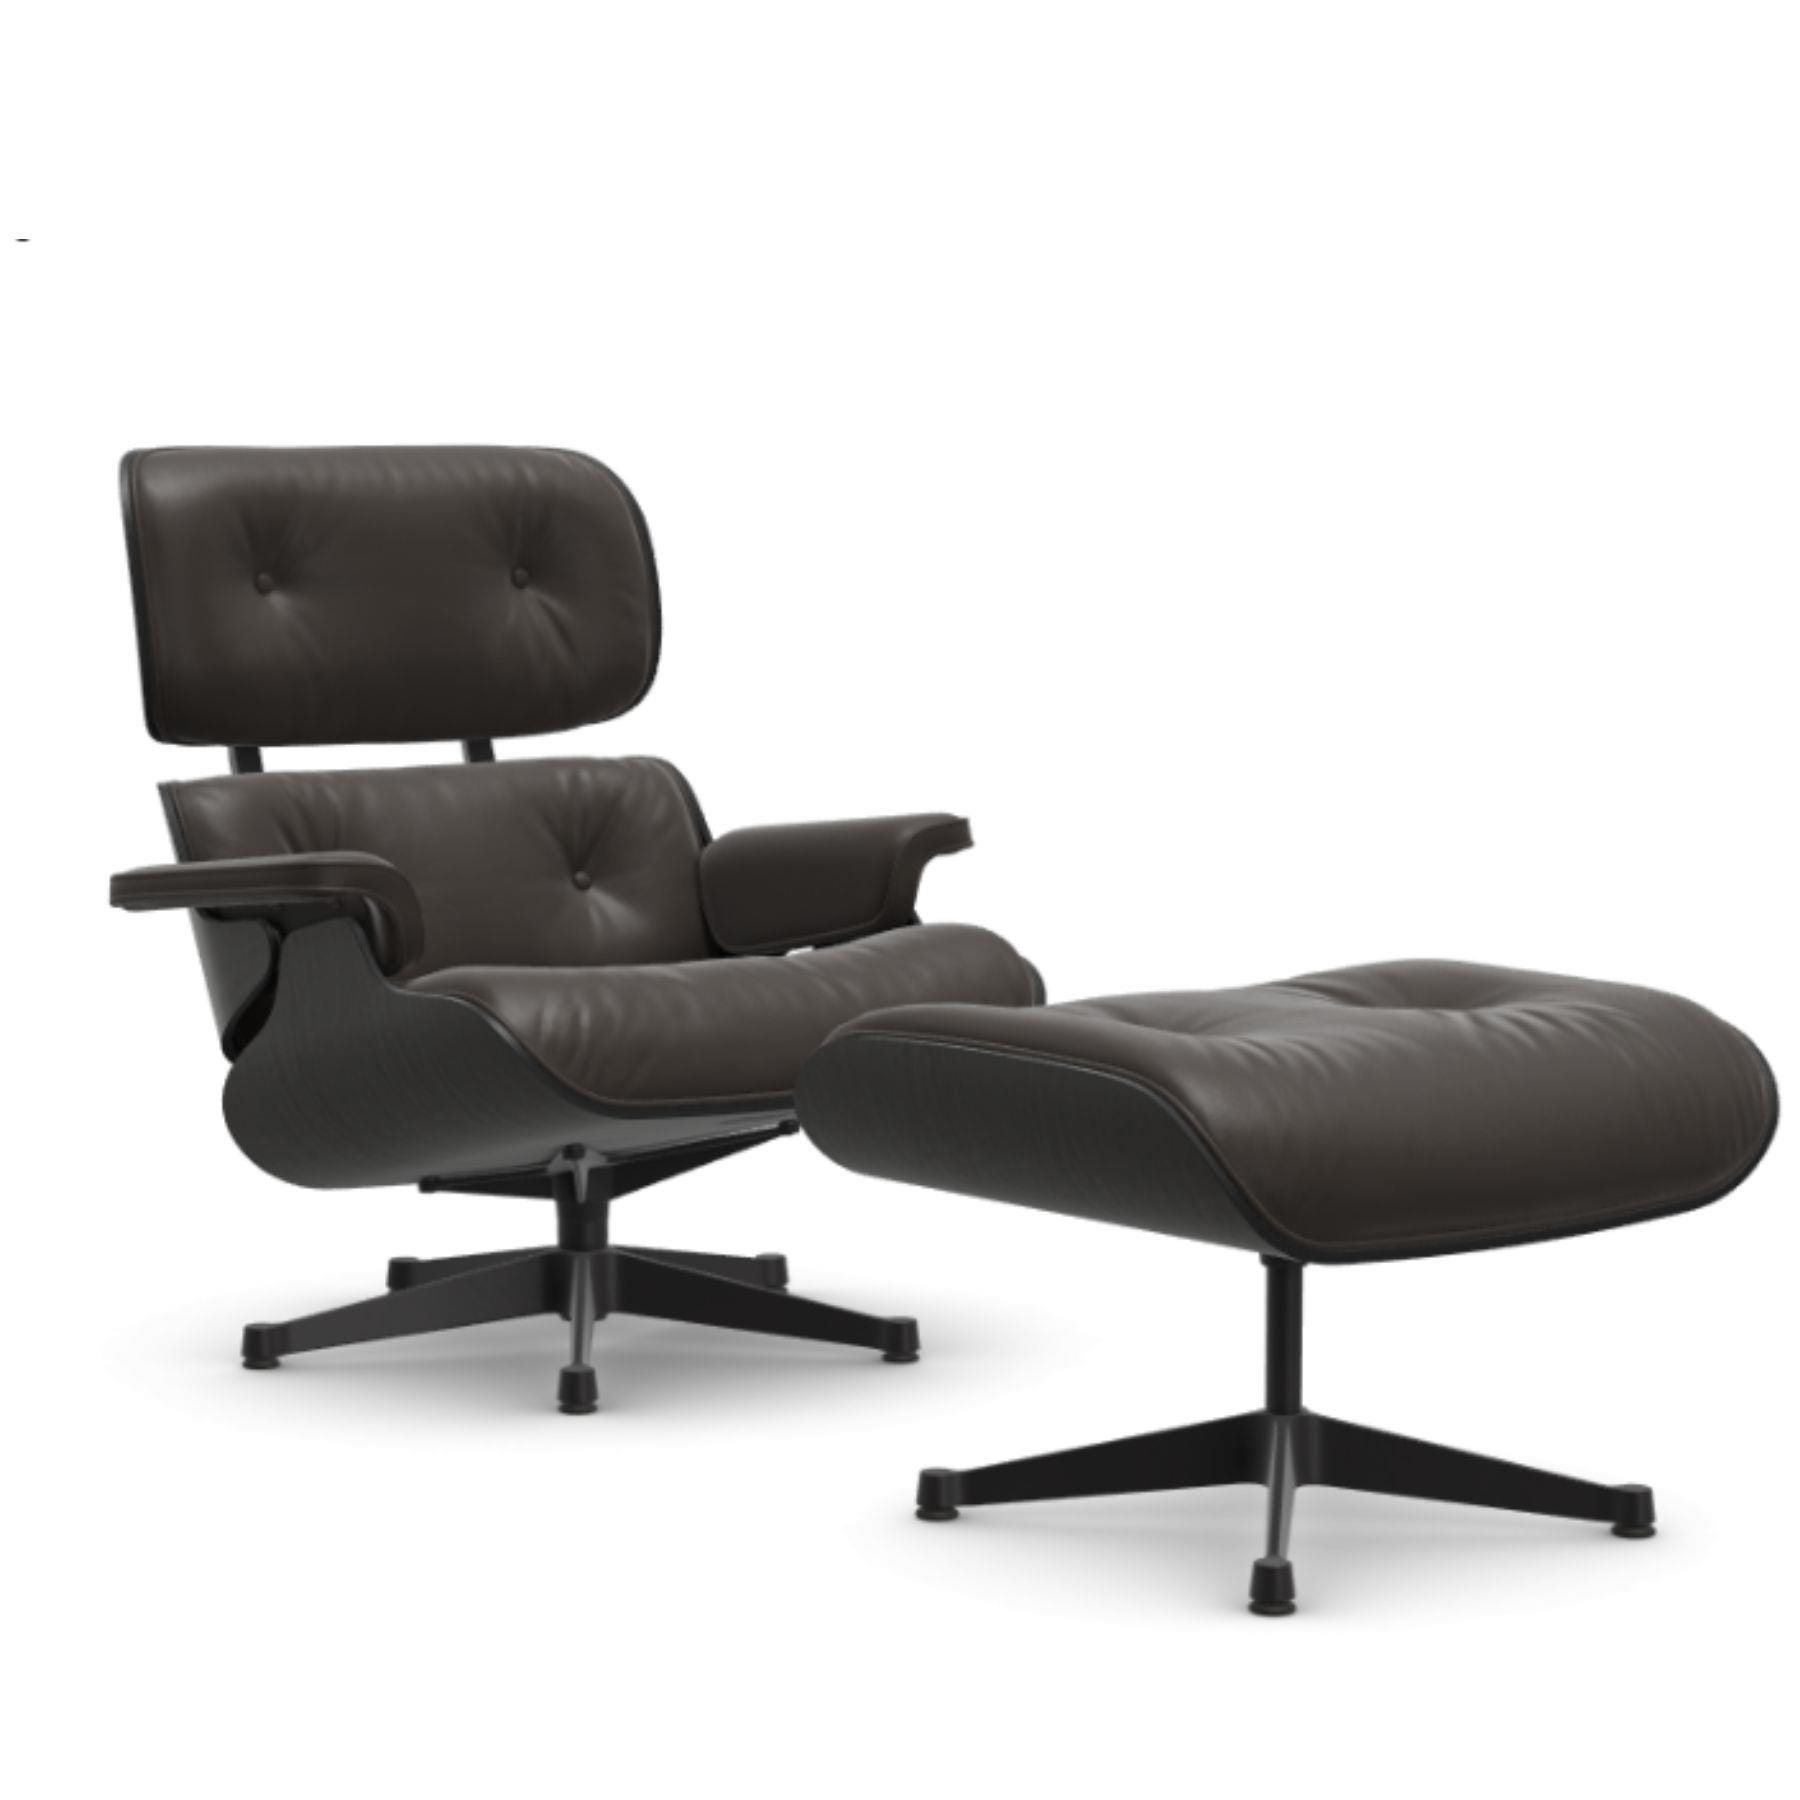 Vitra Eames Lounge Chair Black Ash Leather Natural F Chocolate Polished Black With Ottoman Designer Furniture From Holloways Of Ludlow